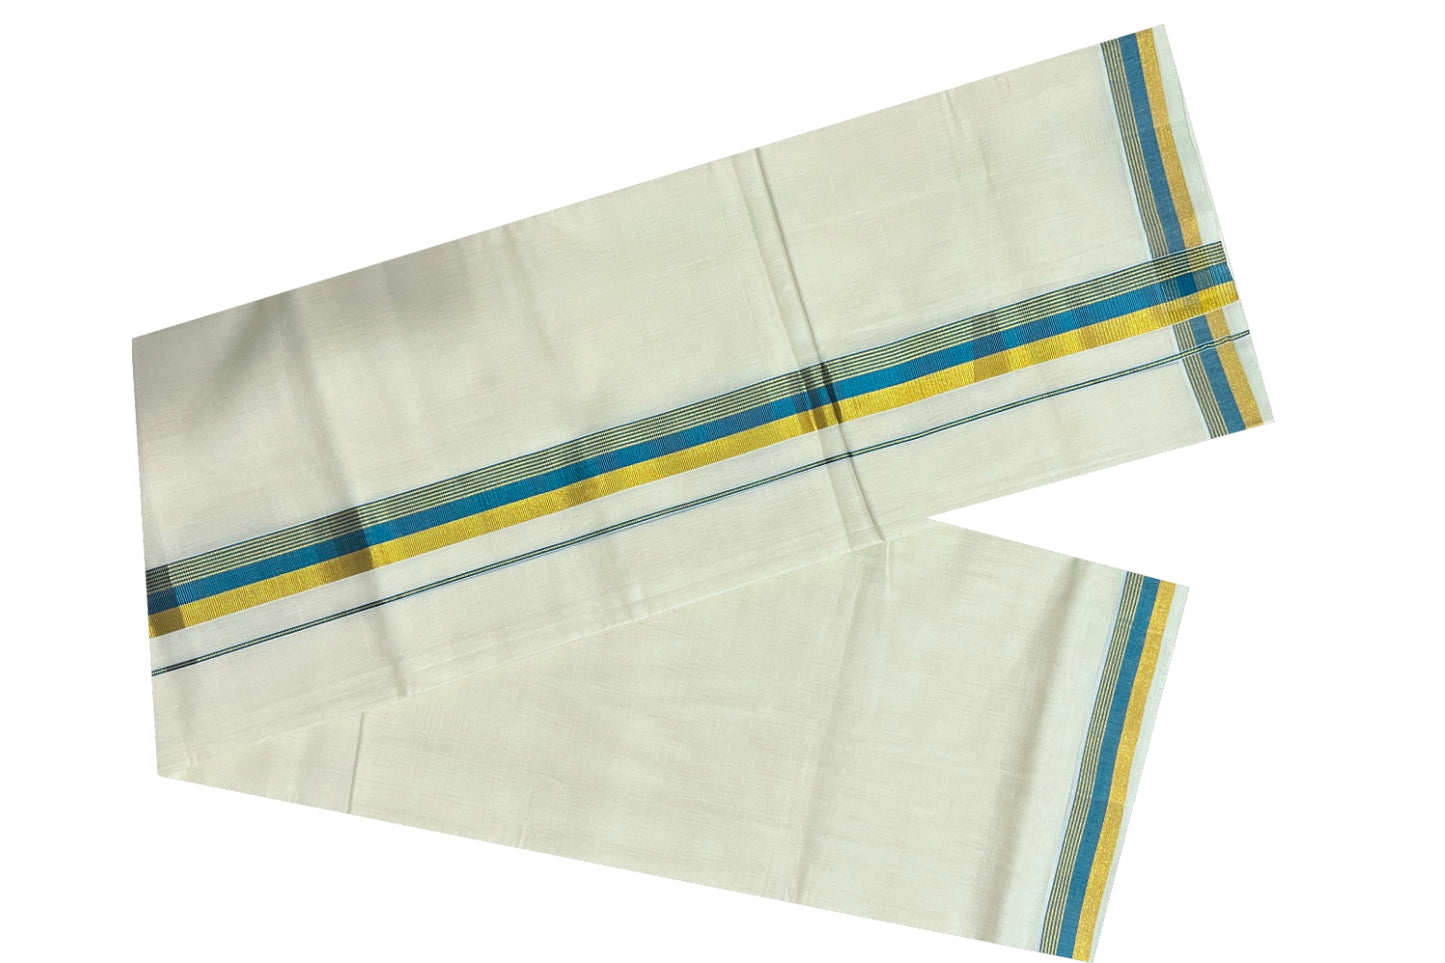 Southloom Kuthampully Handloom Pure Cotton Mundu with Goden and Teal Blue Kasavu Border (South Indian Dhoti)